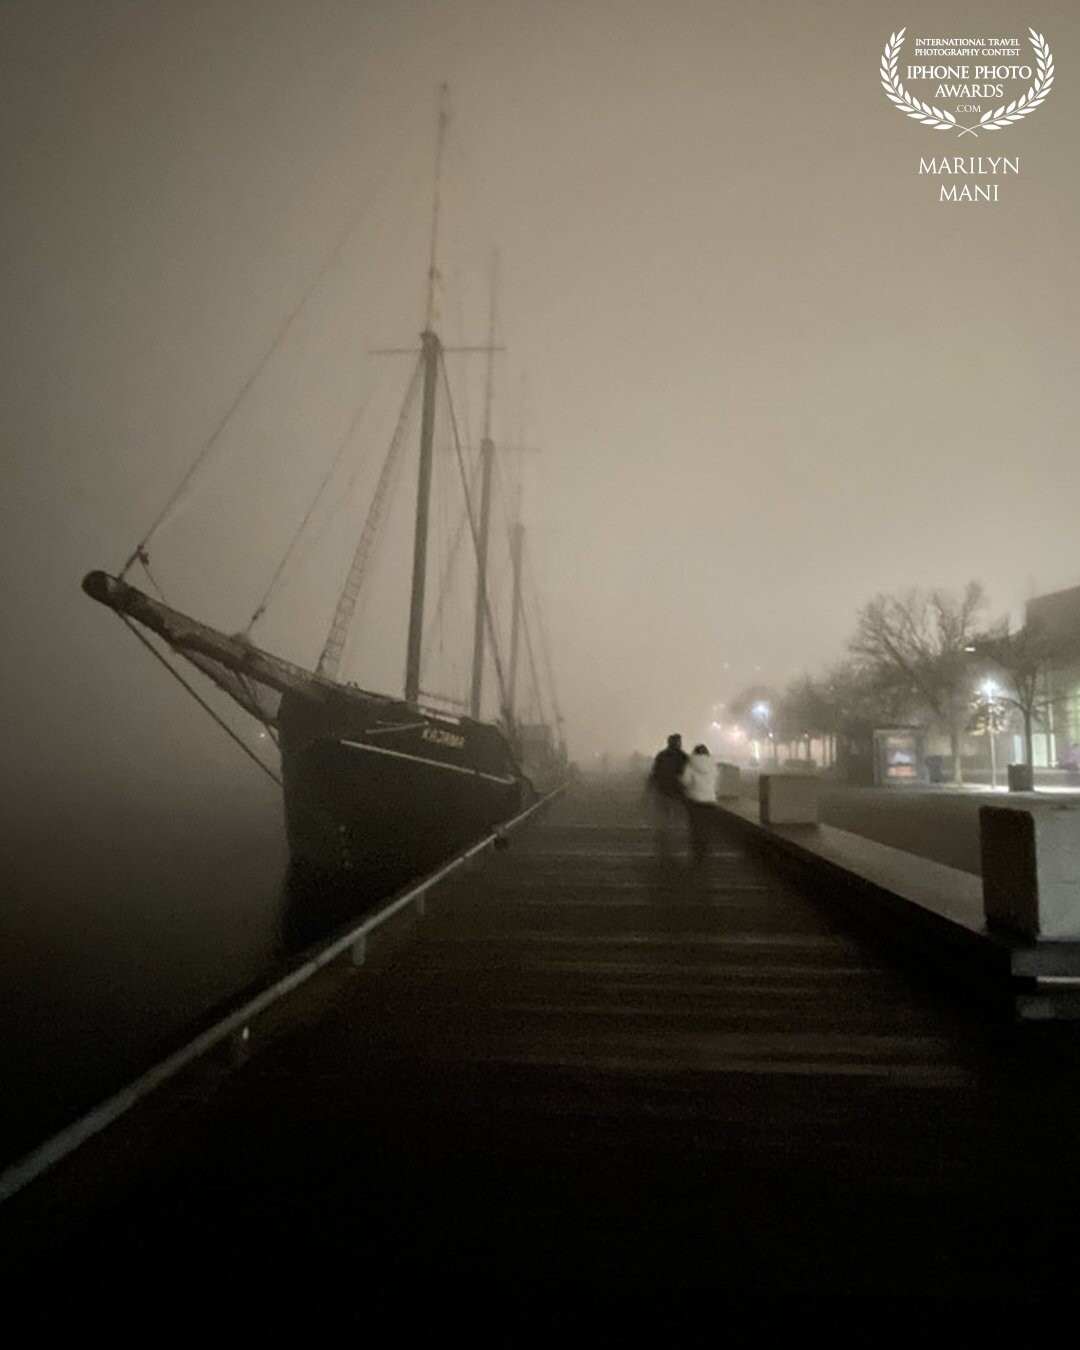 The Toronto Harbourfront looks eerily beautiful even as the dense fog surrounded the city. This photo captured on a beautiful night almost feels like a painting. To be there in that moment barely able to even see the water was a rare spectacle.